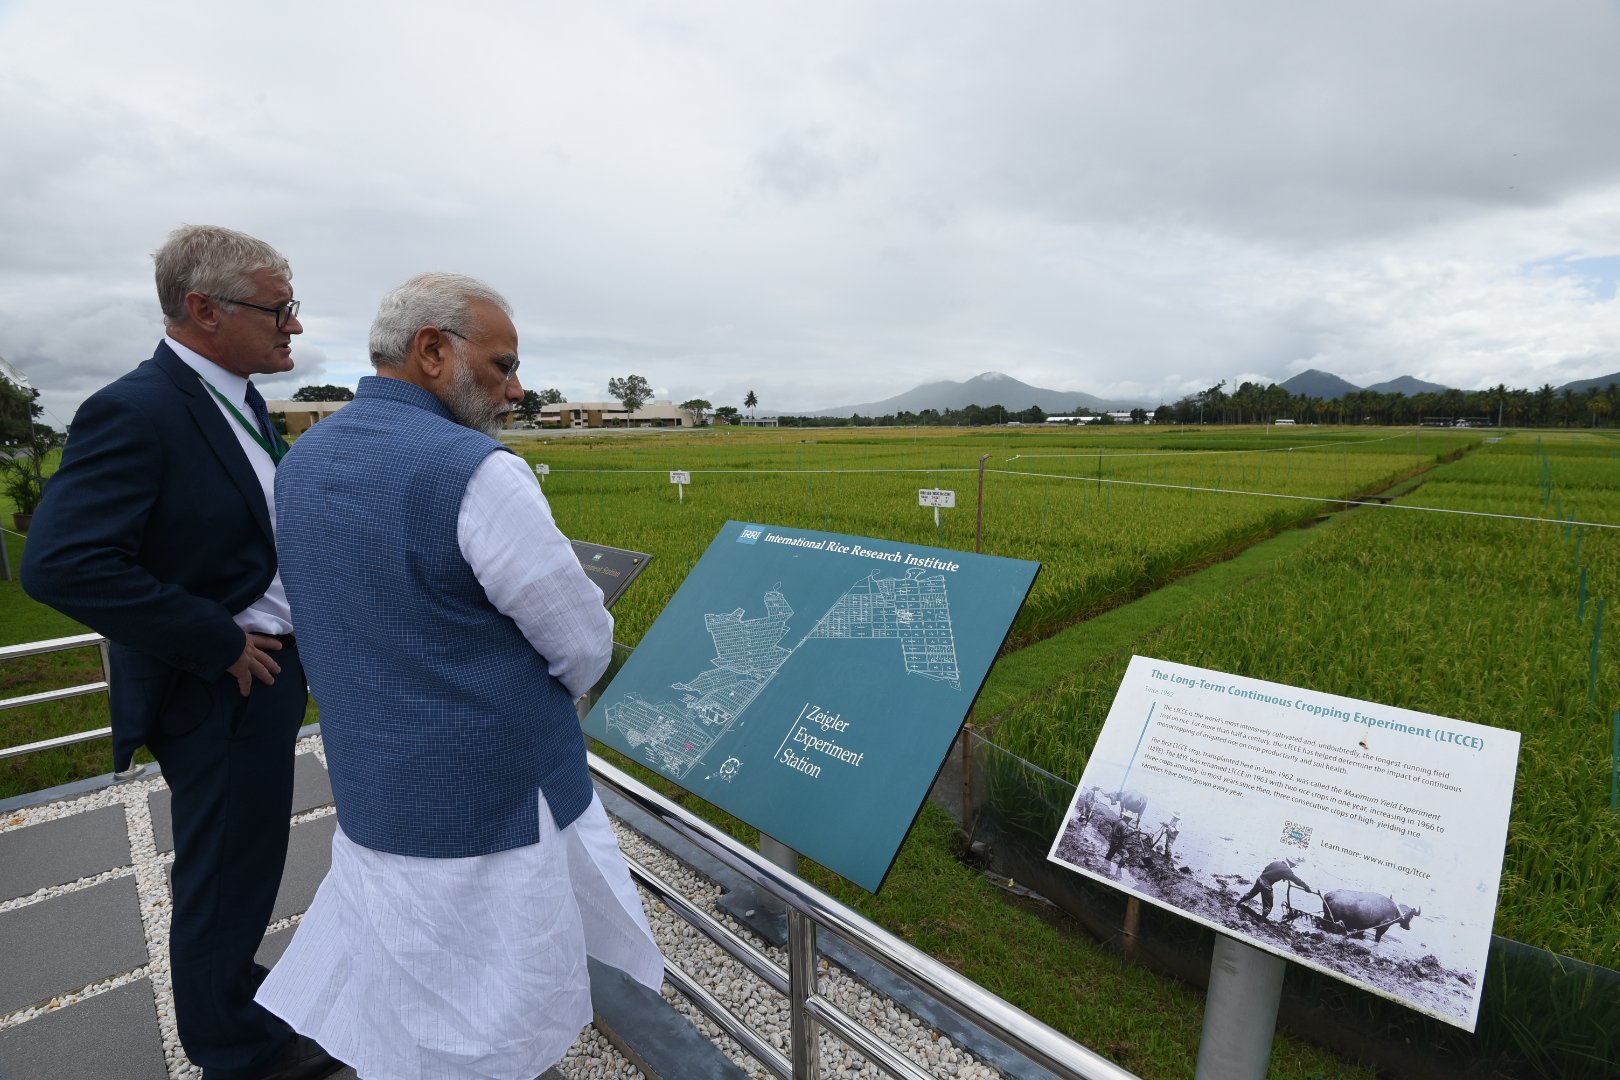 India PM Narendra Modi visits the IRRI in Los banos while in PhL for the Asean summit on Nov. 13, 2017.